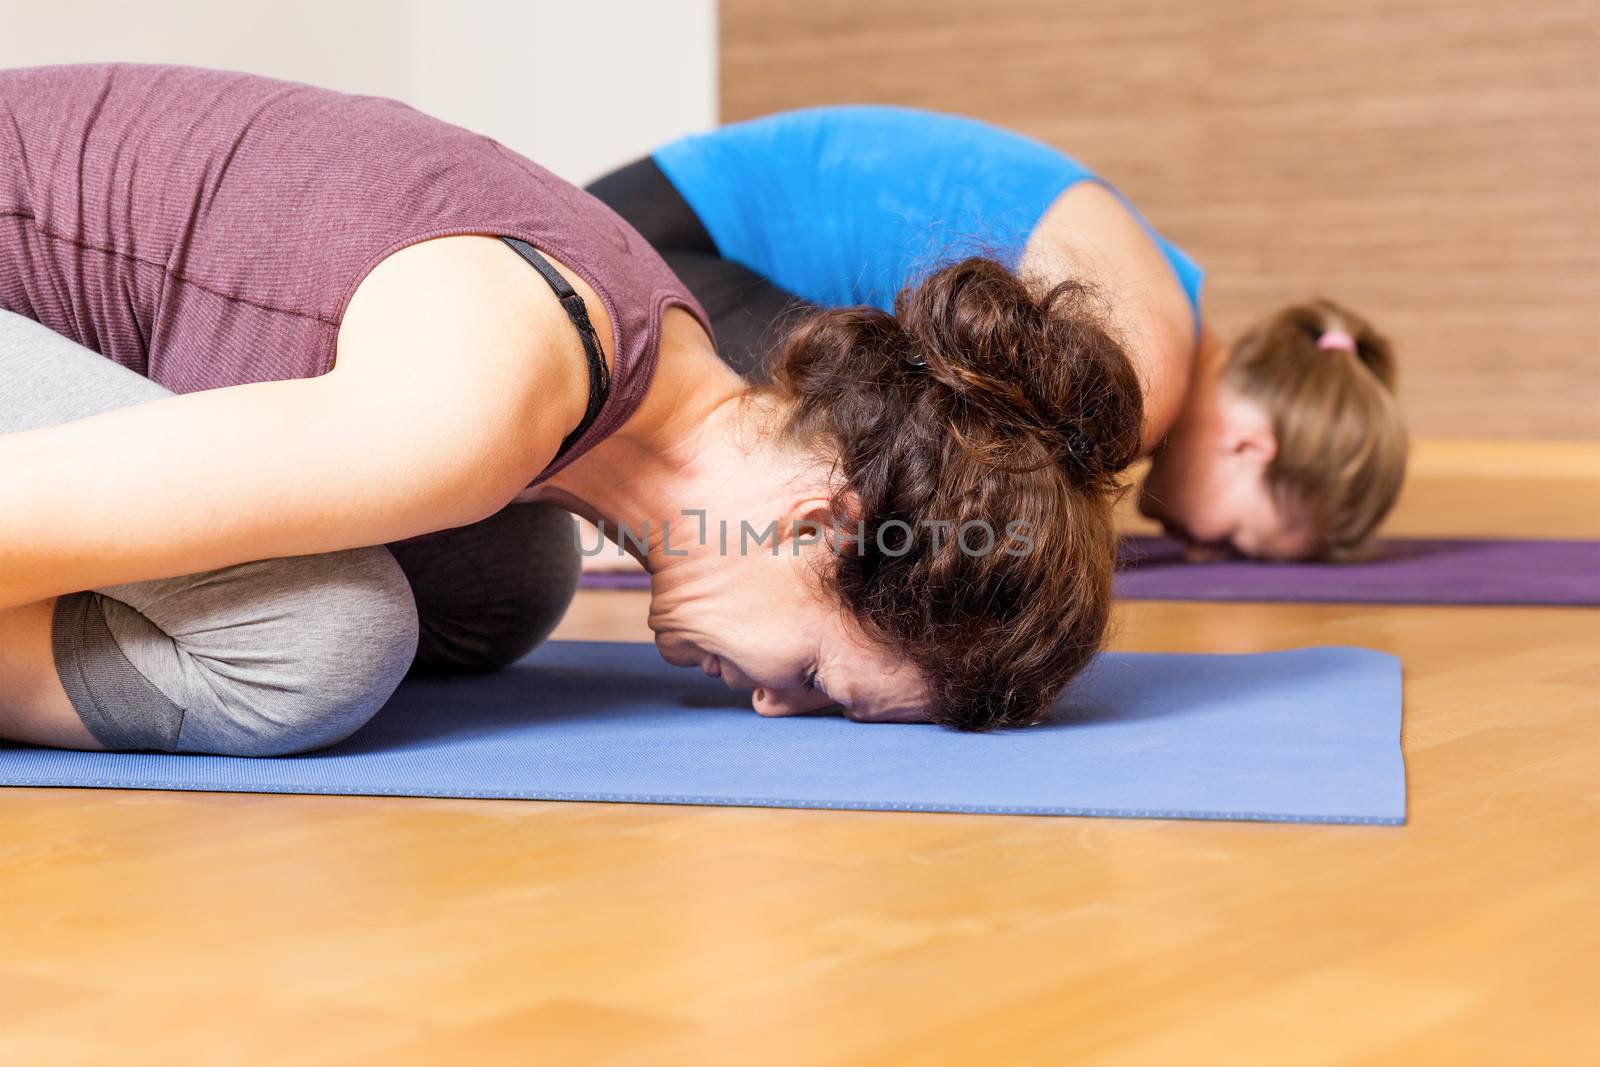 An image of some people doing yoga exercises